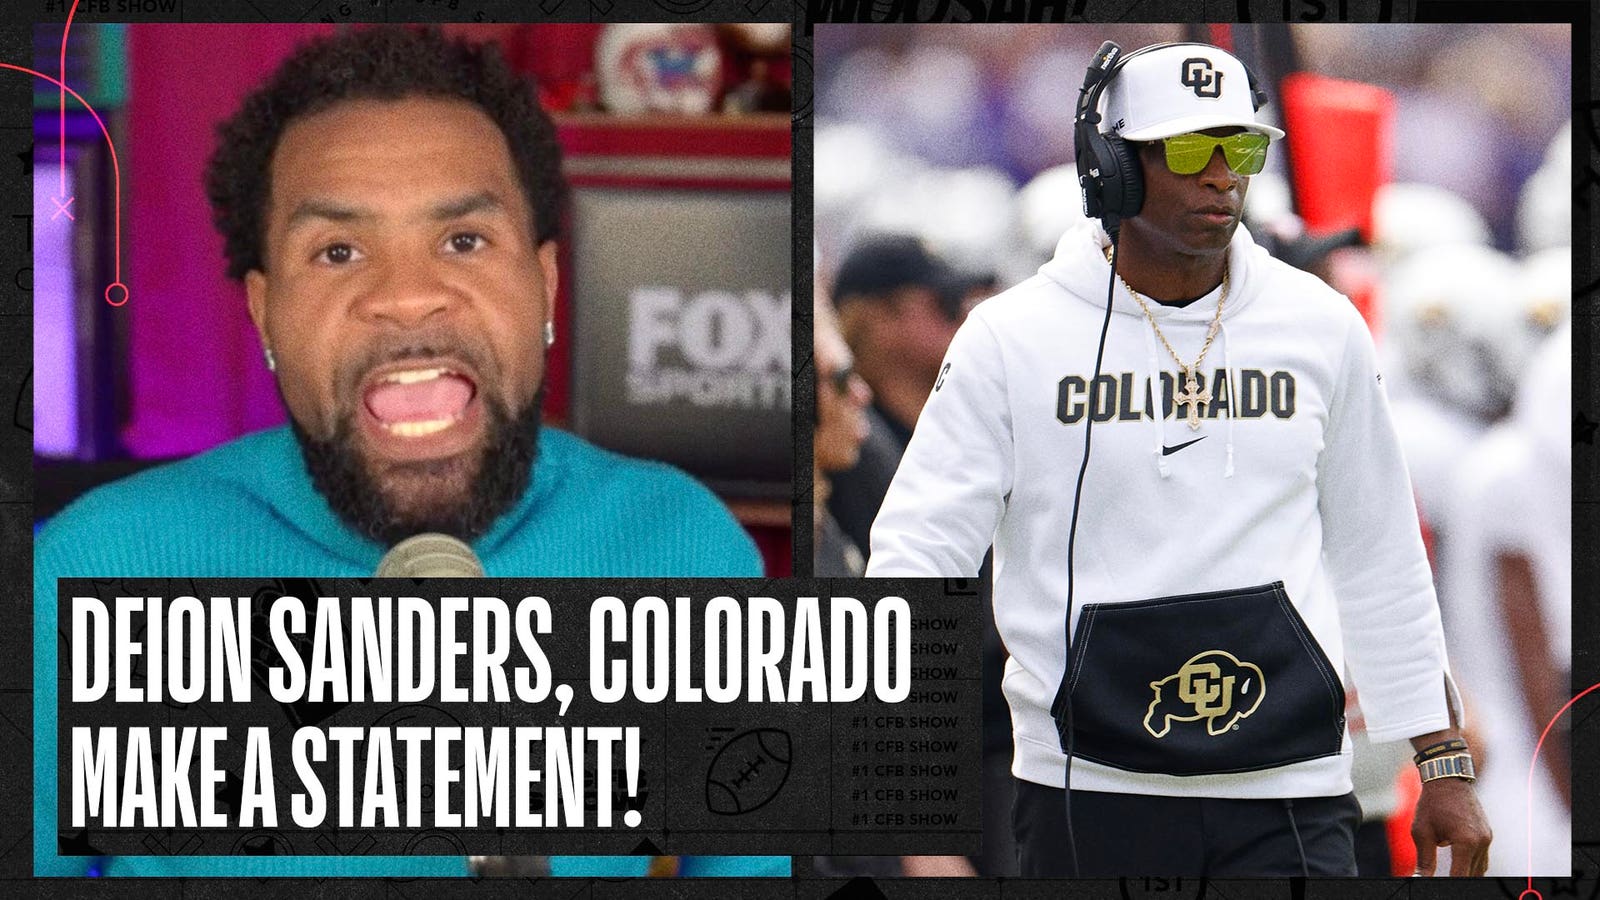 RJ Young reacts to Deion Sanders, Colorado's upset victory over No. 17 TCU | No. 1 CFB Show